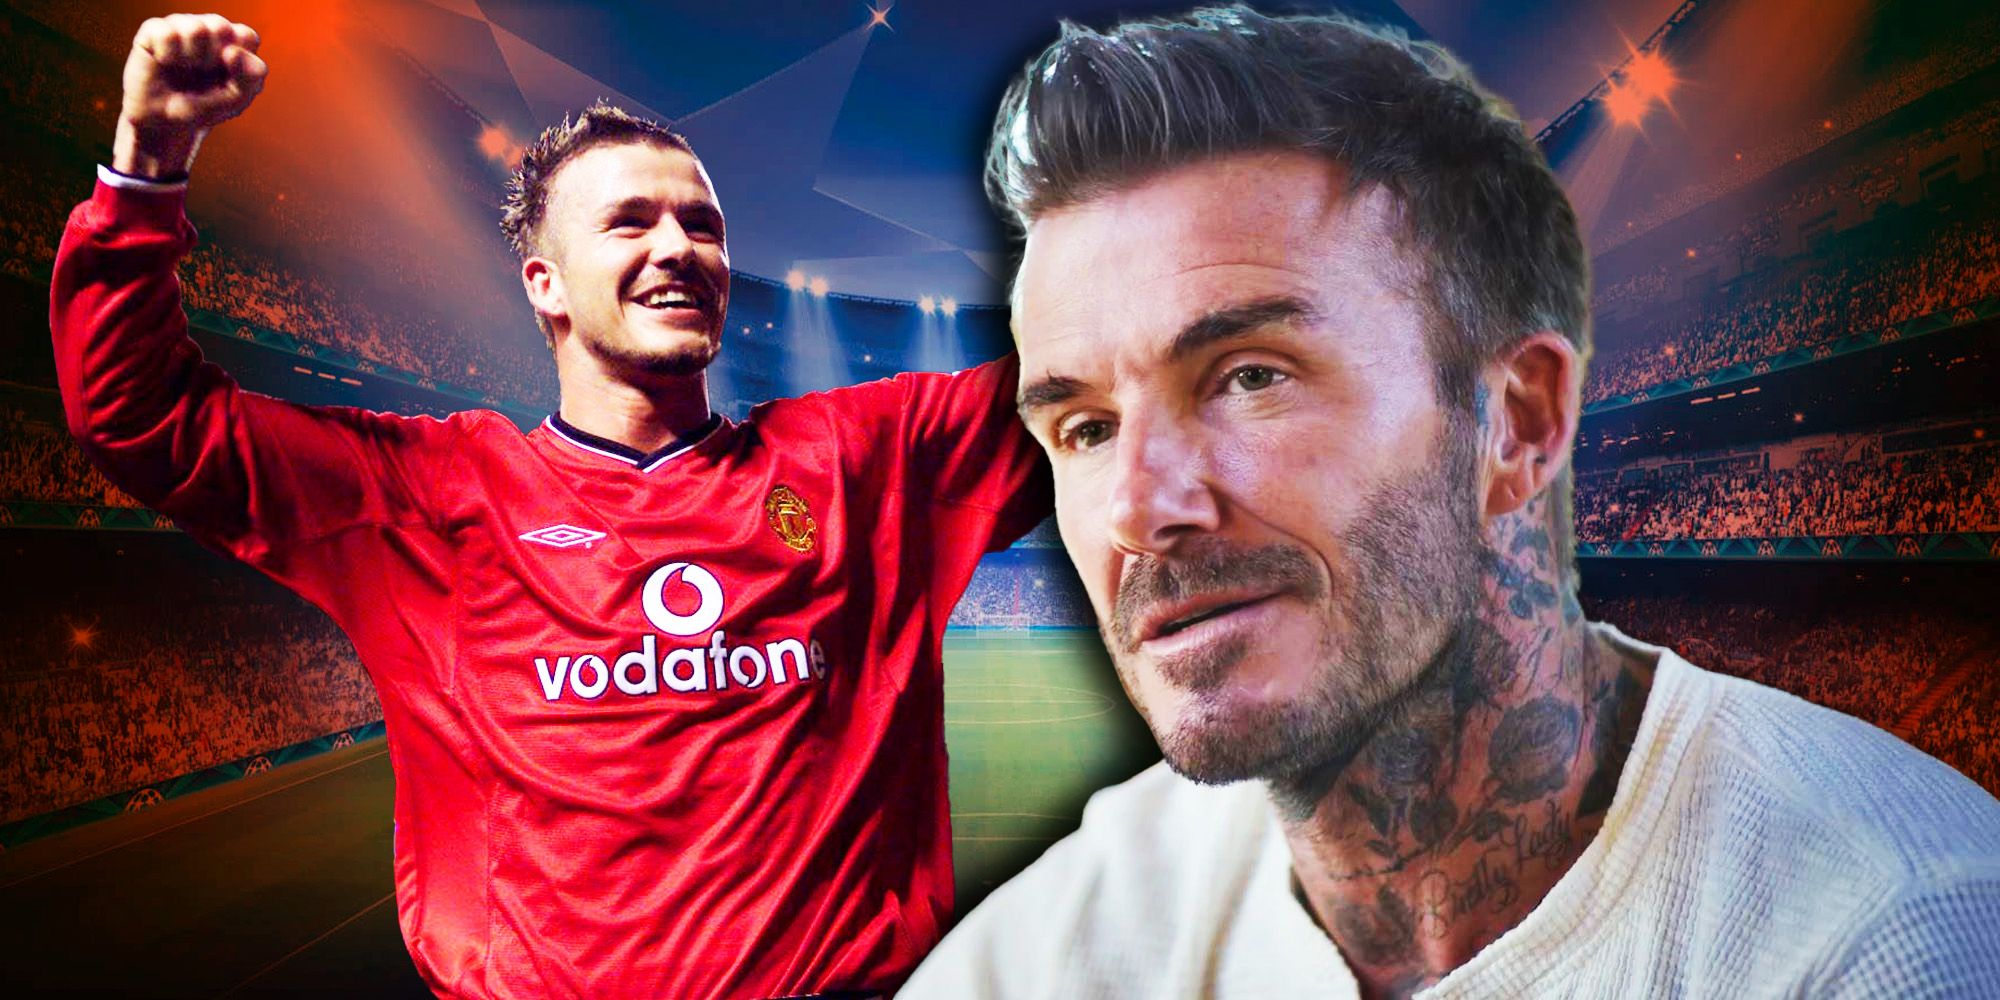 David Beckham Doc Series in Works at Netflix with Fisher Stevens